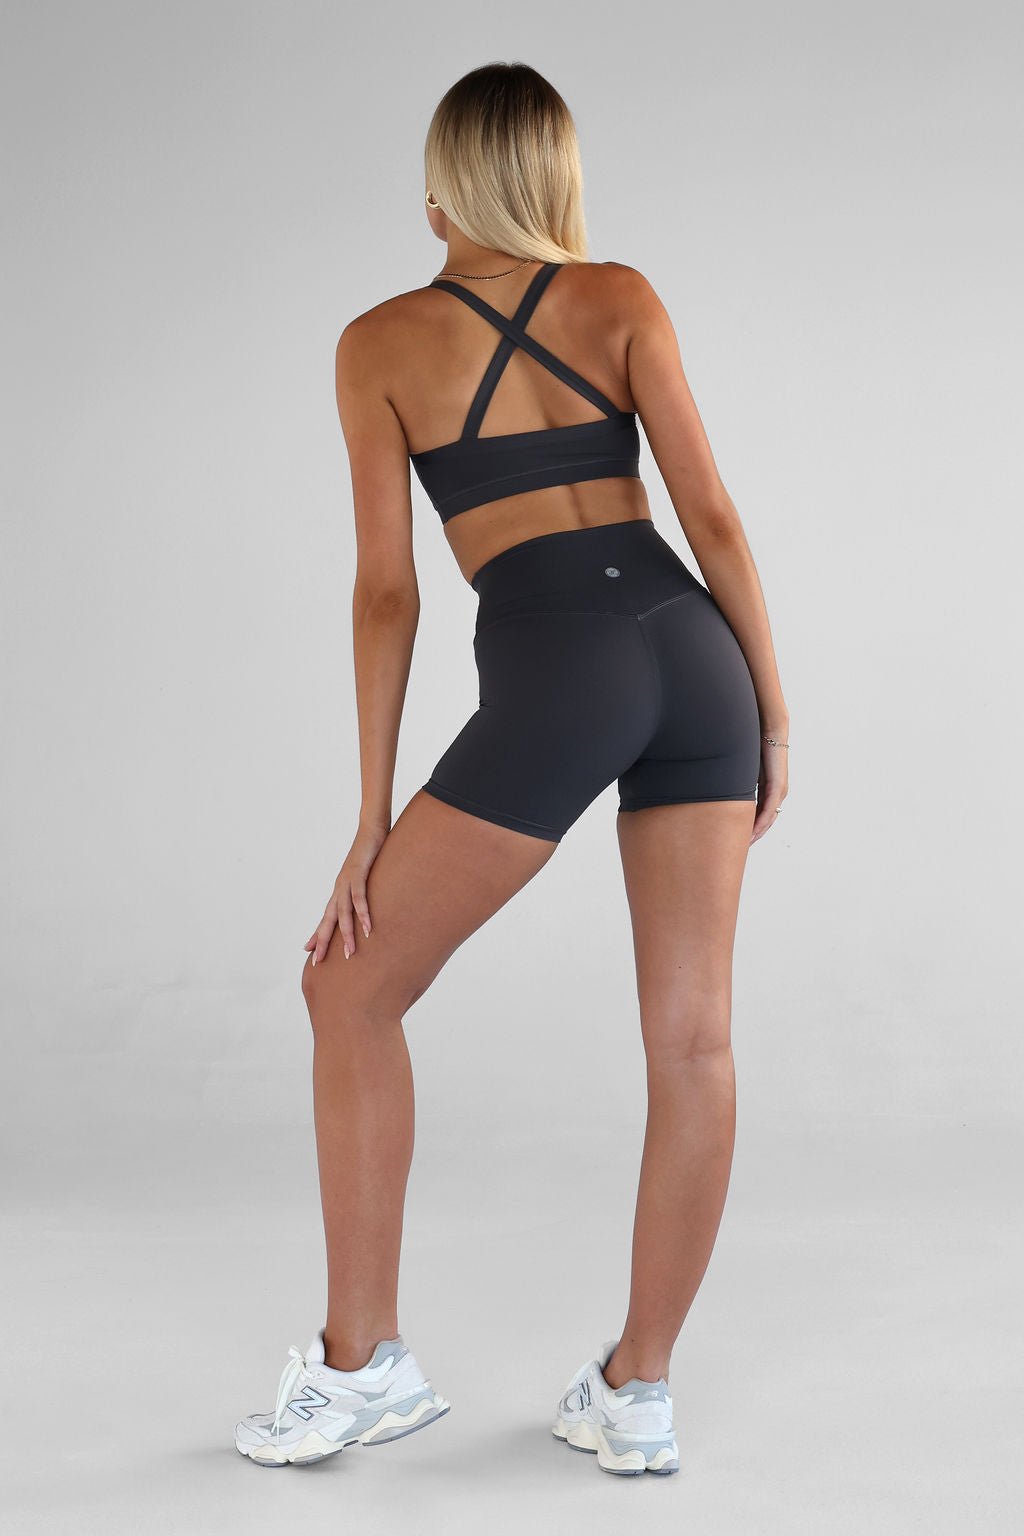 SCULPT Bike Shorts - Ash SHIPPING FROM 12/02 - LEELO ACTIVE